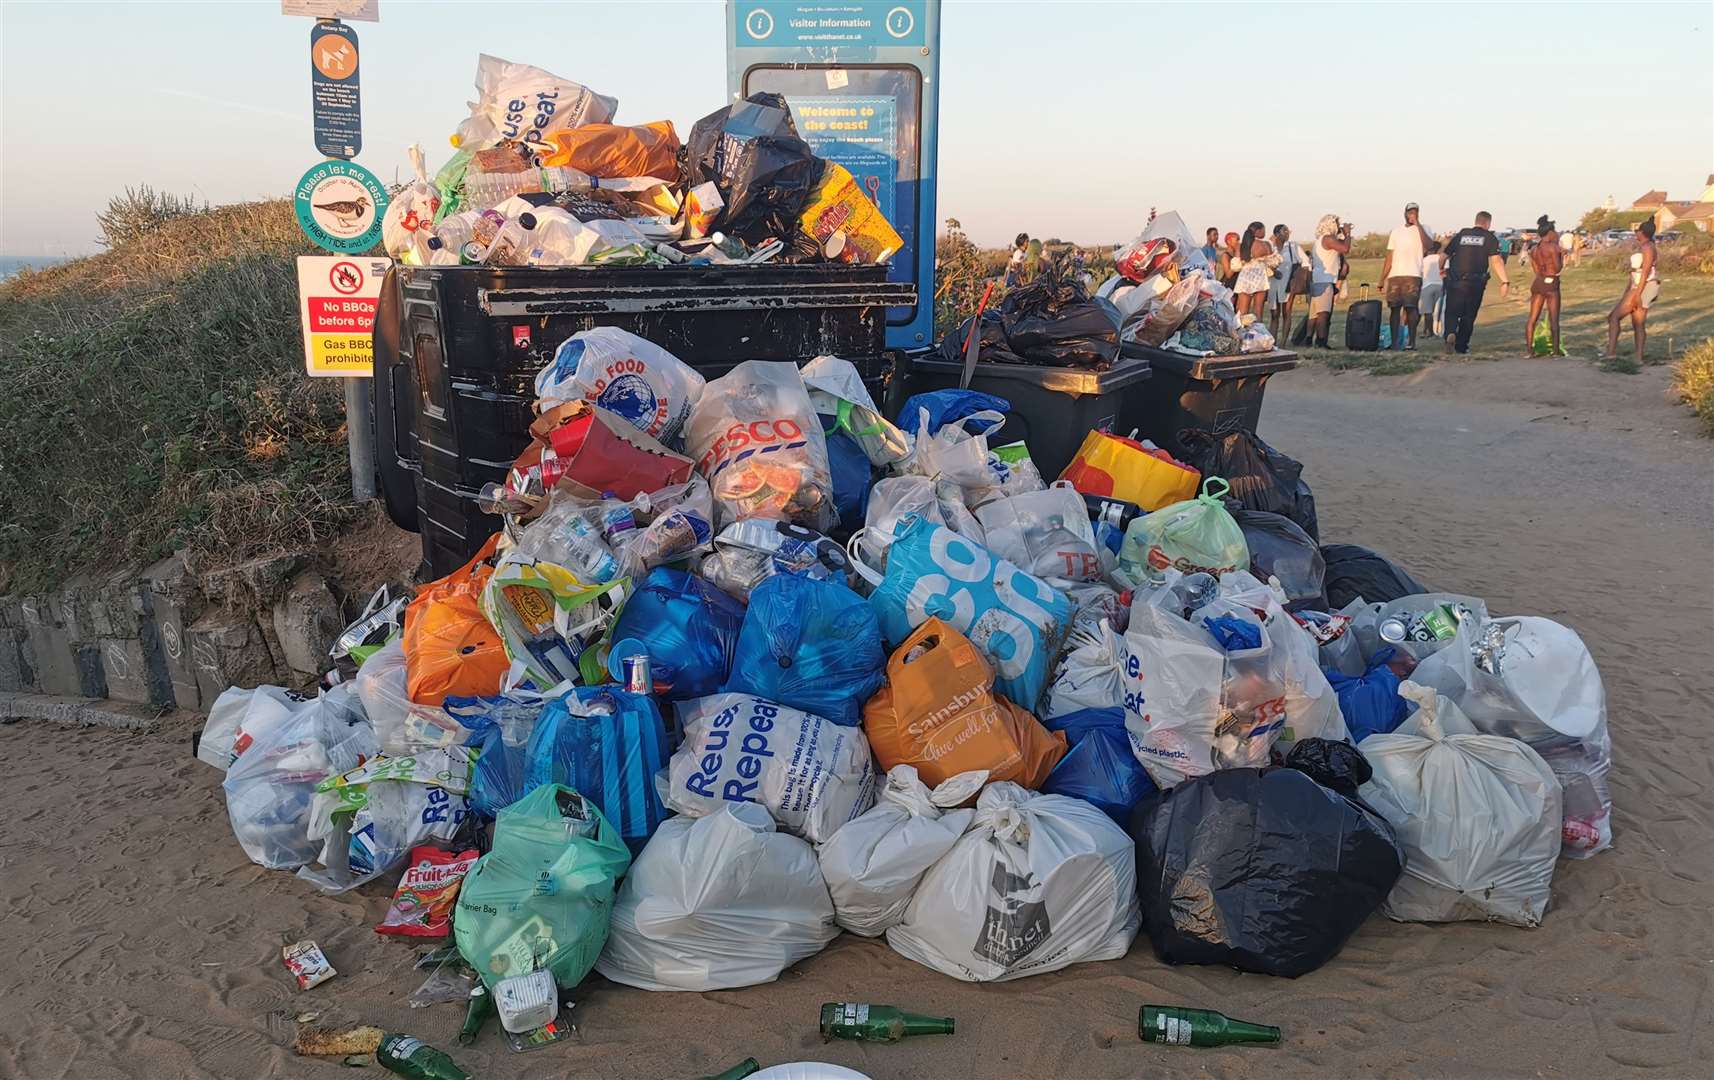 Rubbish is a by-product of popularity - but it costs to clear it up